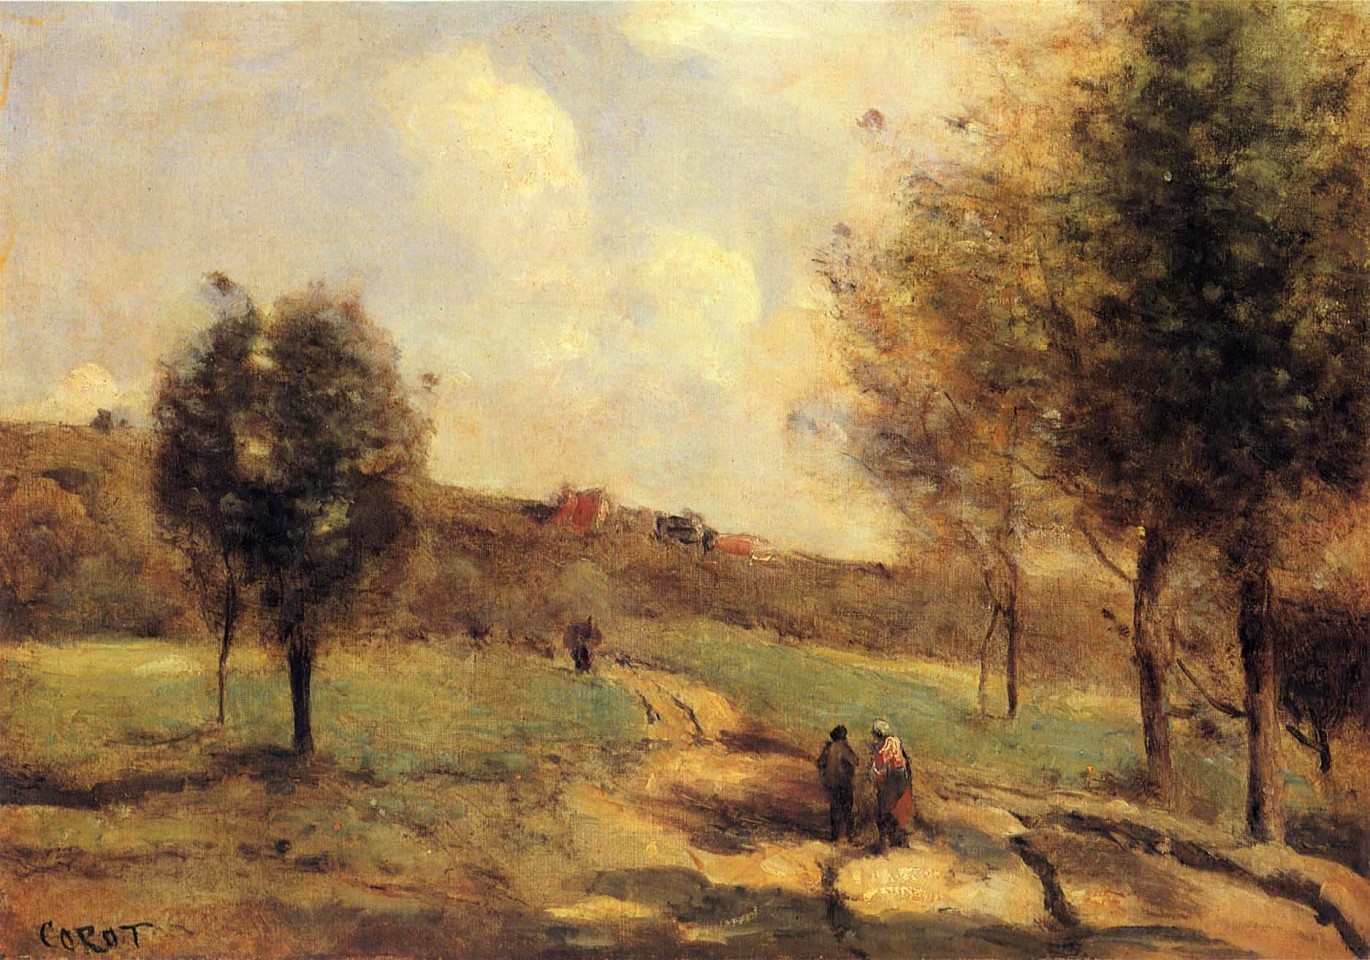 Jean Baptiste Camille Corot, Coubron - Route Montante, ca. 1870
Oil on canvas, 10 x 14 in. (25.4 x 35.6 cm)
COR-007-PA
Appraisal Value: $0.00
User2: $0.00
User3: $0.00